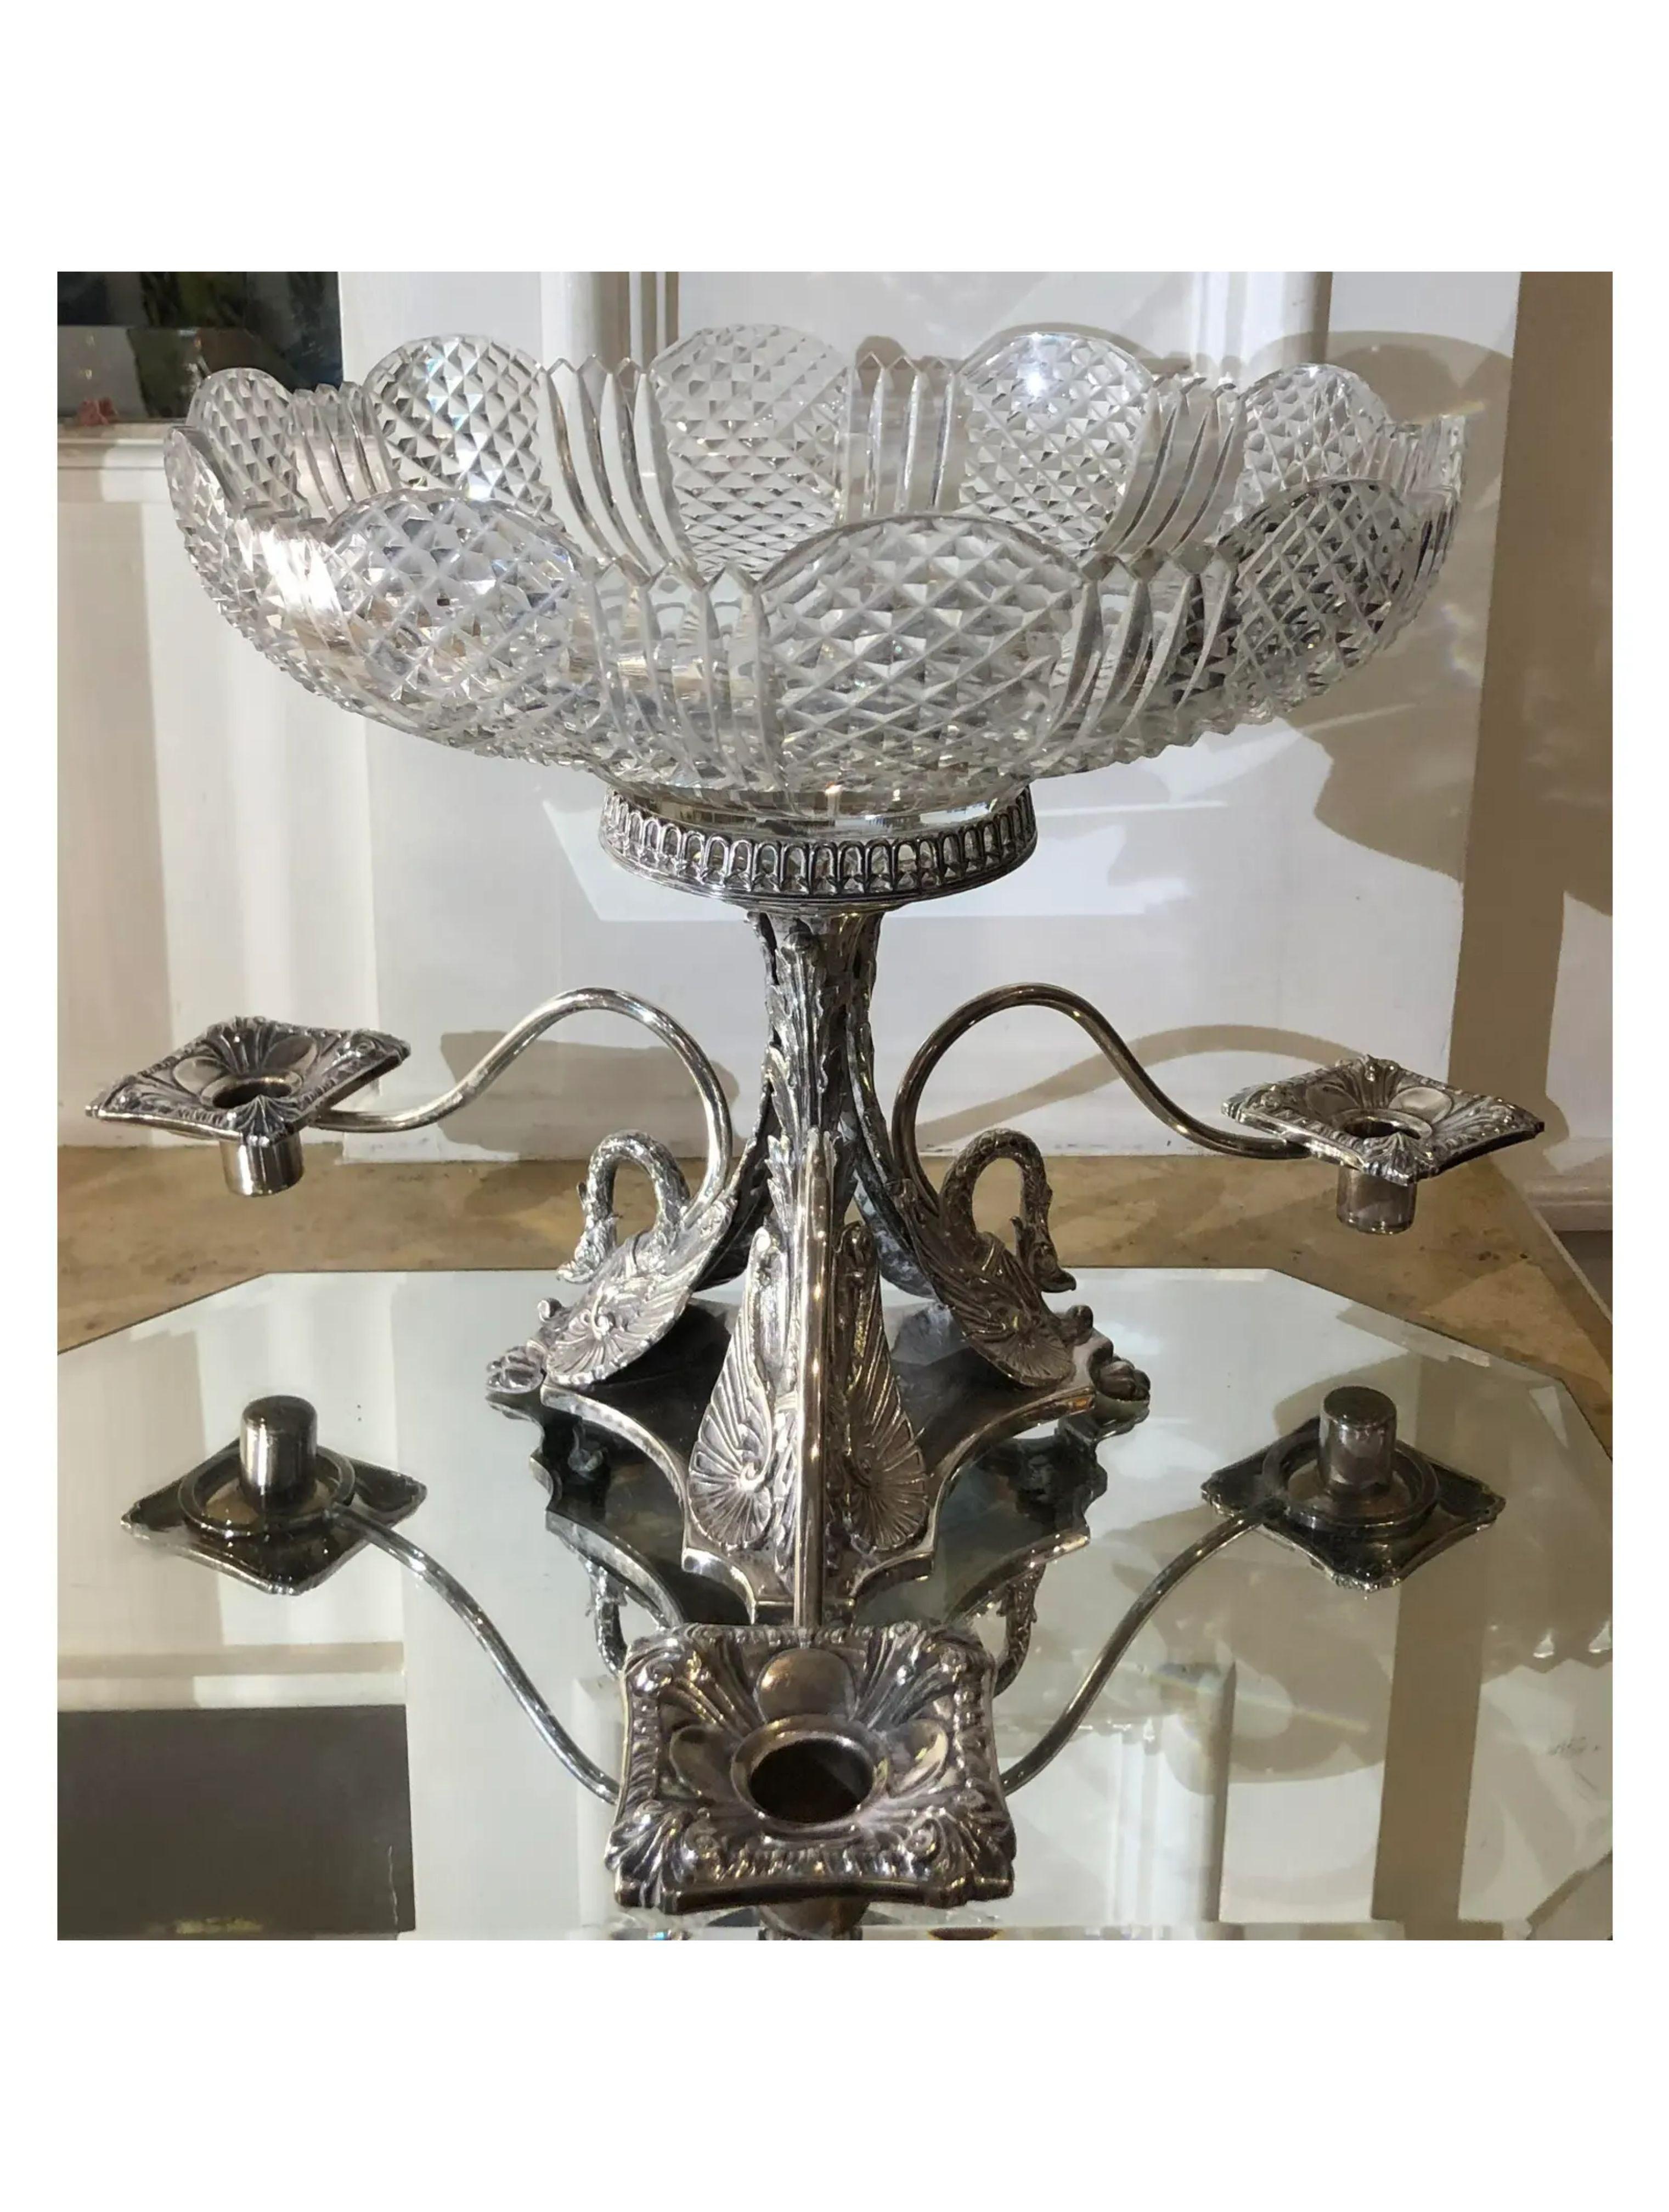 Antique English Silver Plate & Crystal Centerpiece

Additional information:
Materials: Crystal, Metal
Color: Silver
Period: Mid-19th Century
Place of Origin: England
Country of Origin: United Kingdom
Styles: English
Item Type: Vintage,